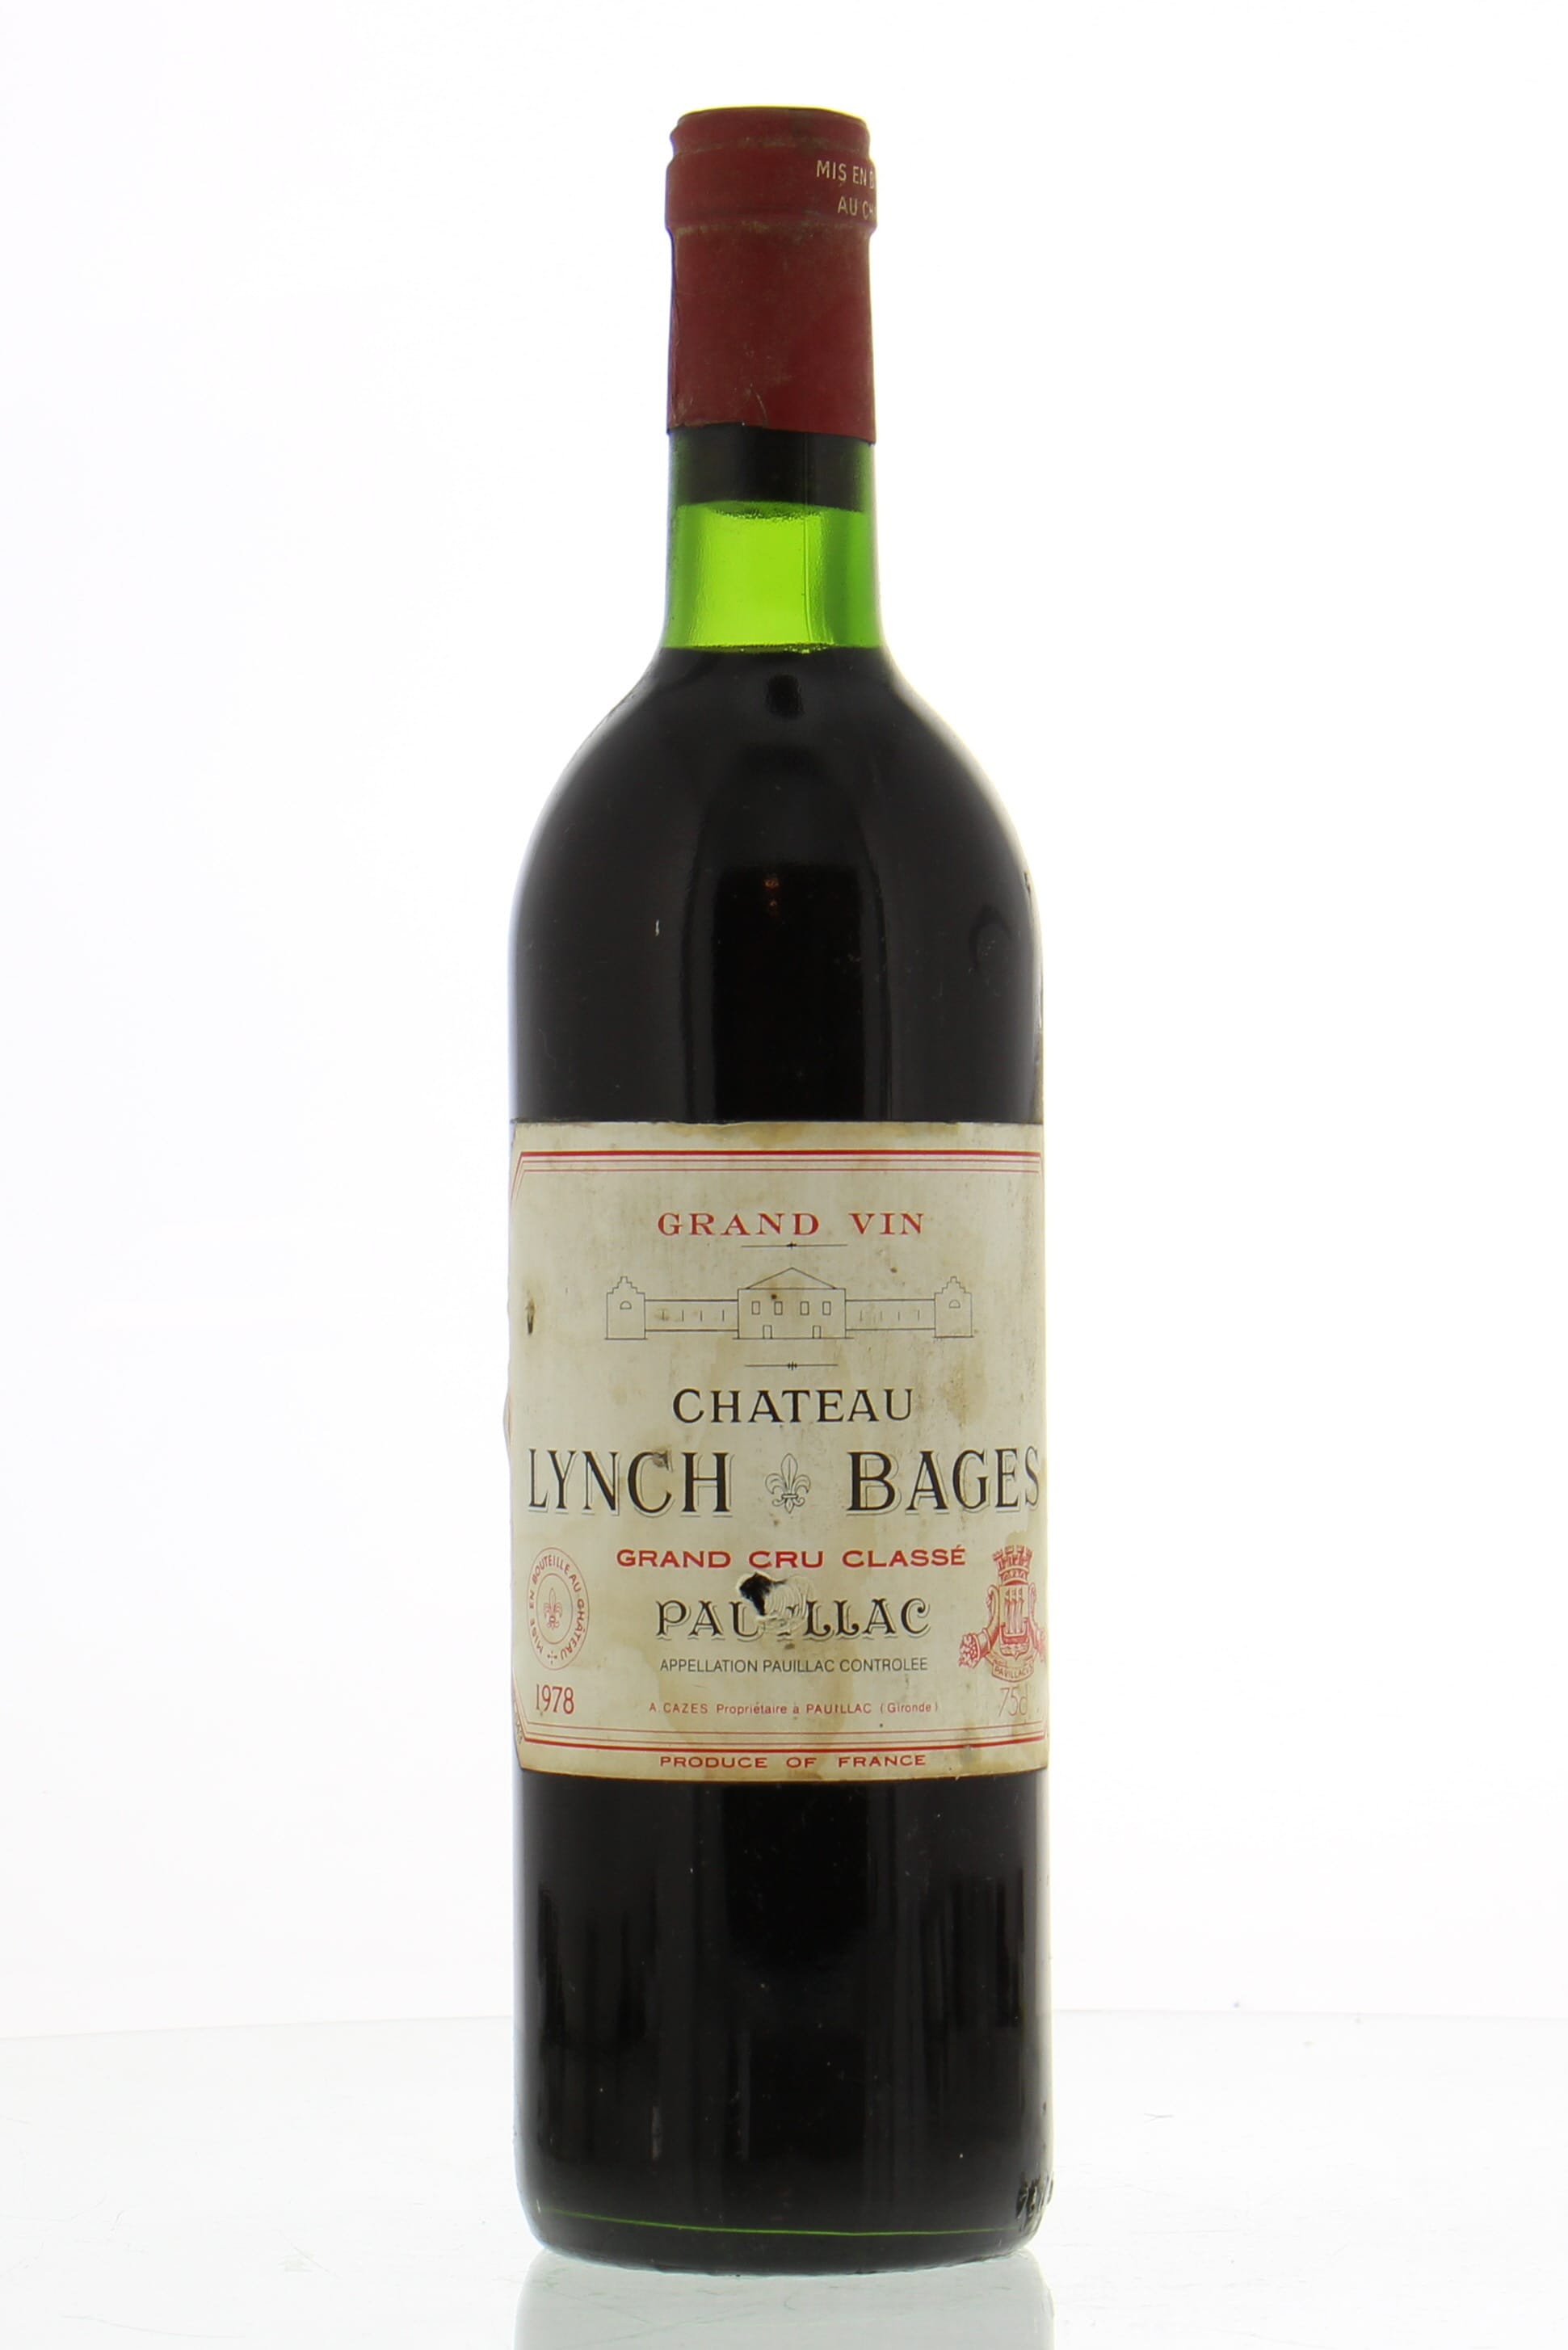 Chateau Lynch Bages - Chateau Lynch Bages 1978 Perfect